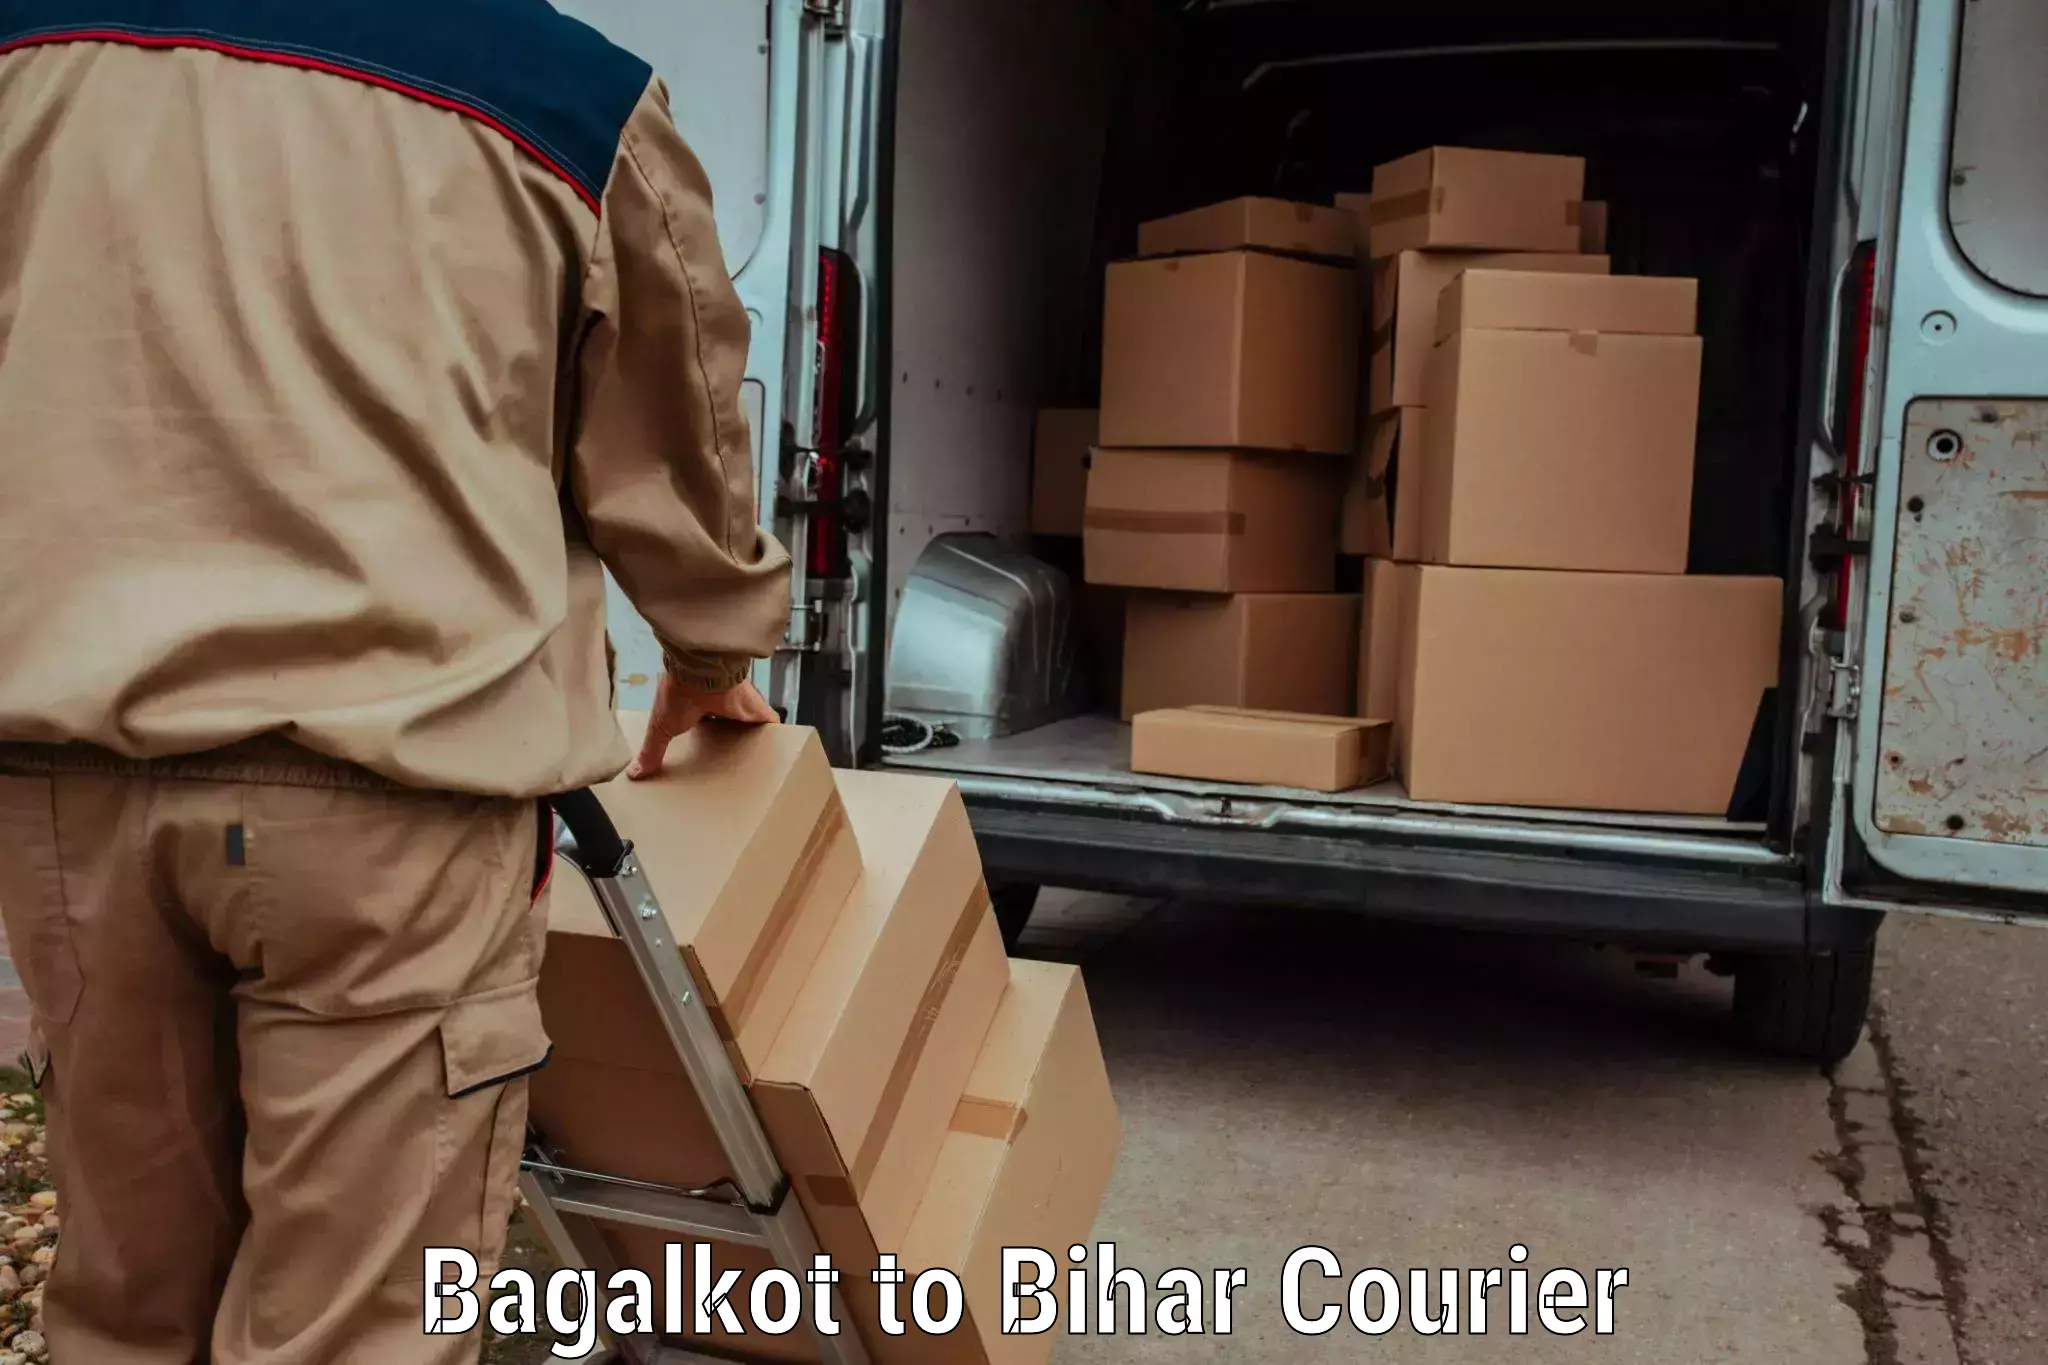 Local delivery service Bagalkot to Bihar